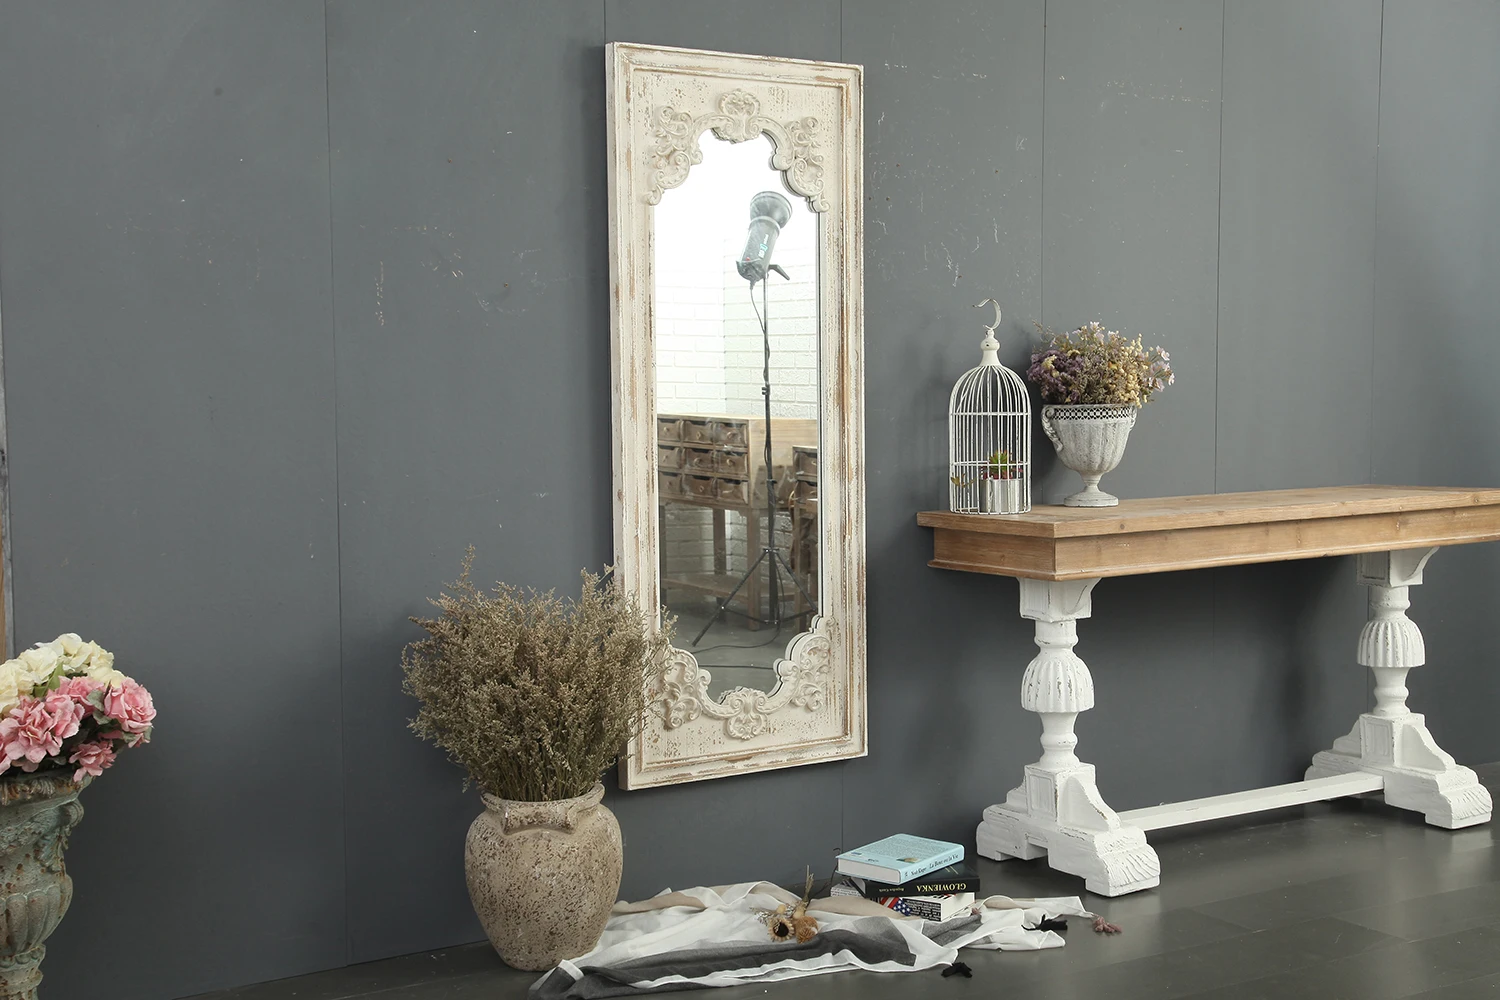 
HOME ready to ship big size decorative rustic antique white wood wall mirror shabby hanging rectangular framed mirror 